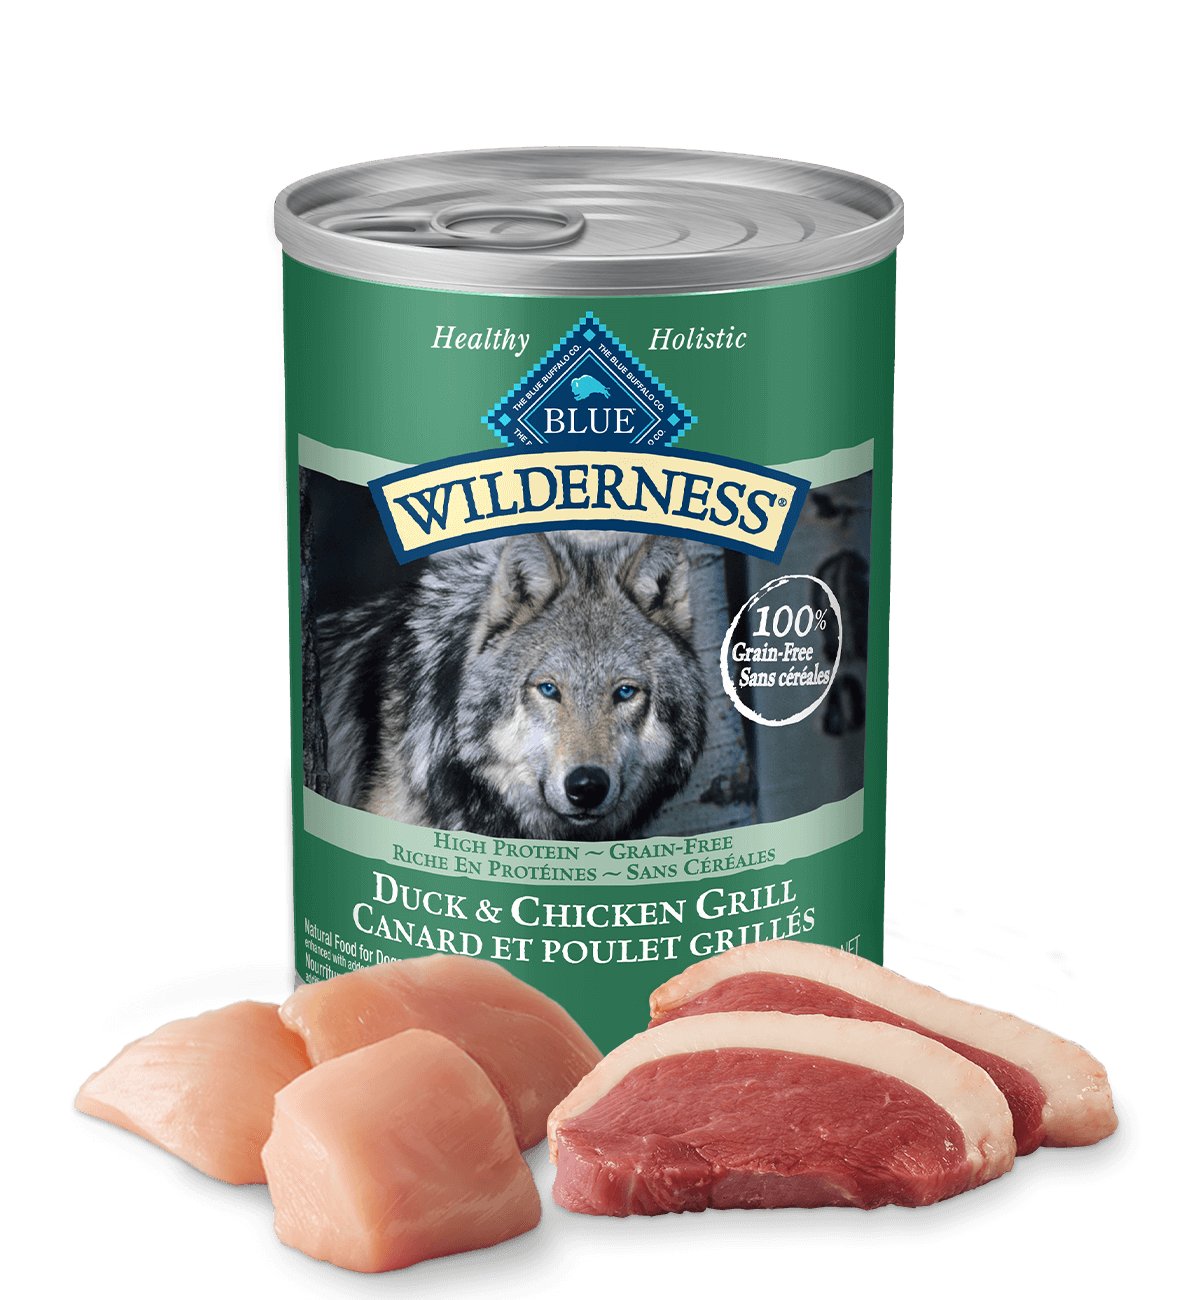 Canada Wilderness duck and chicken adult canned wet dog food